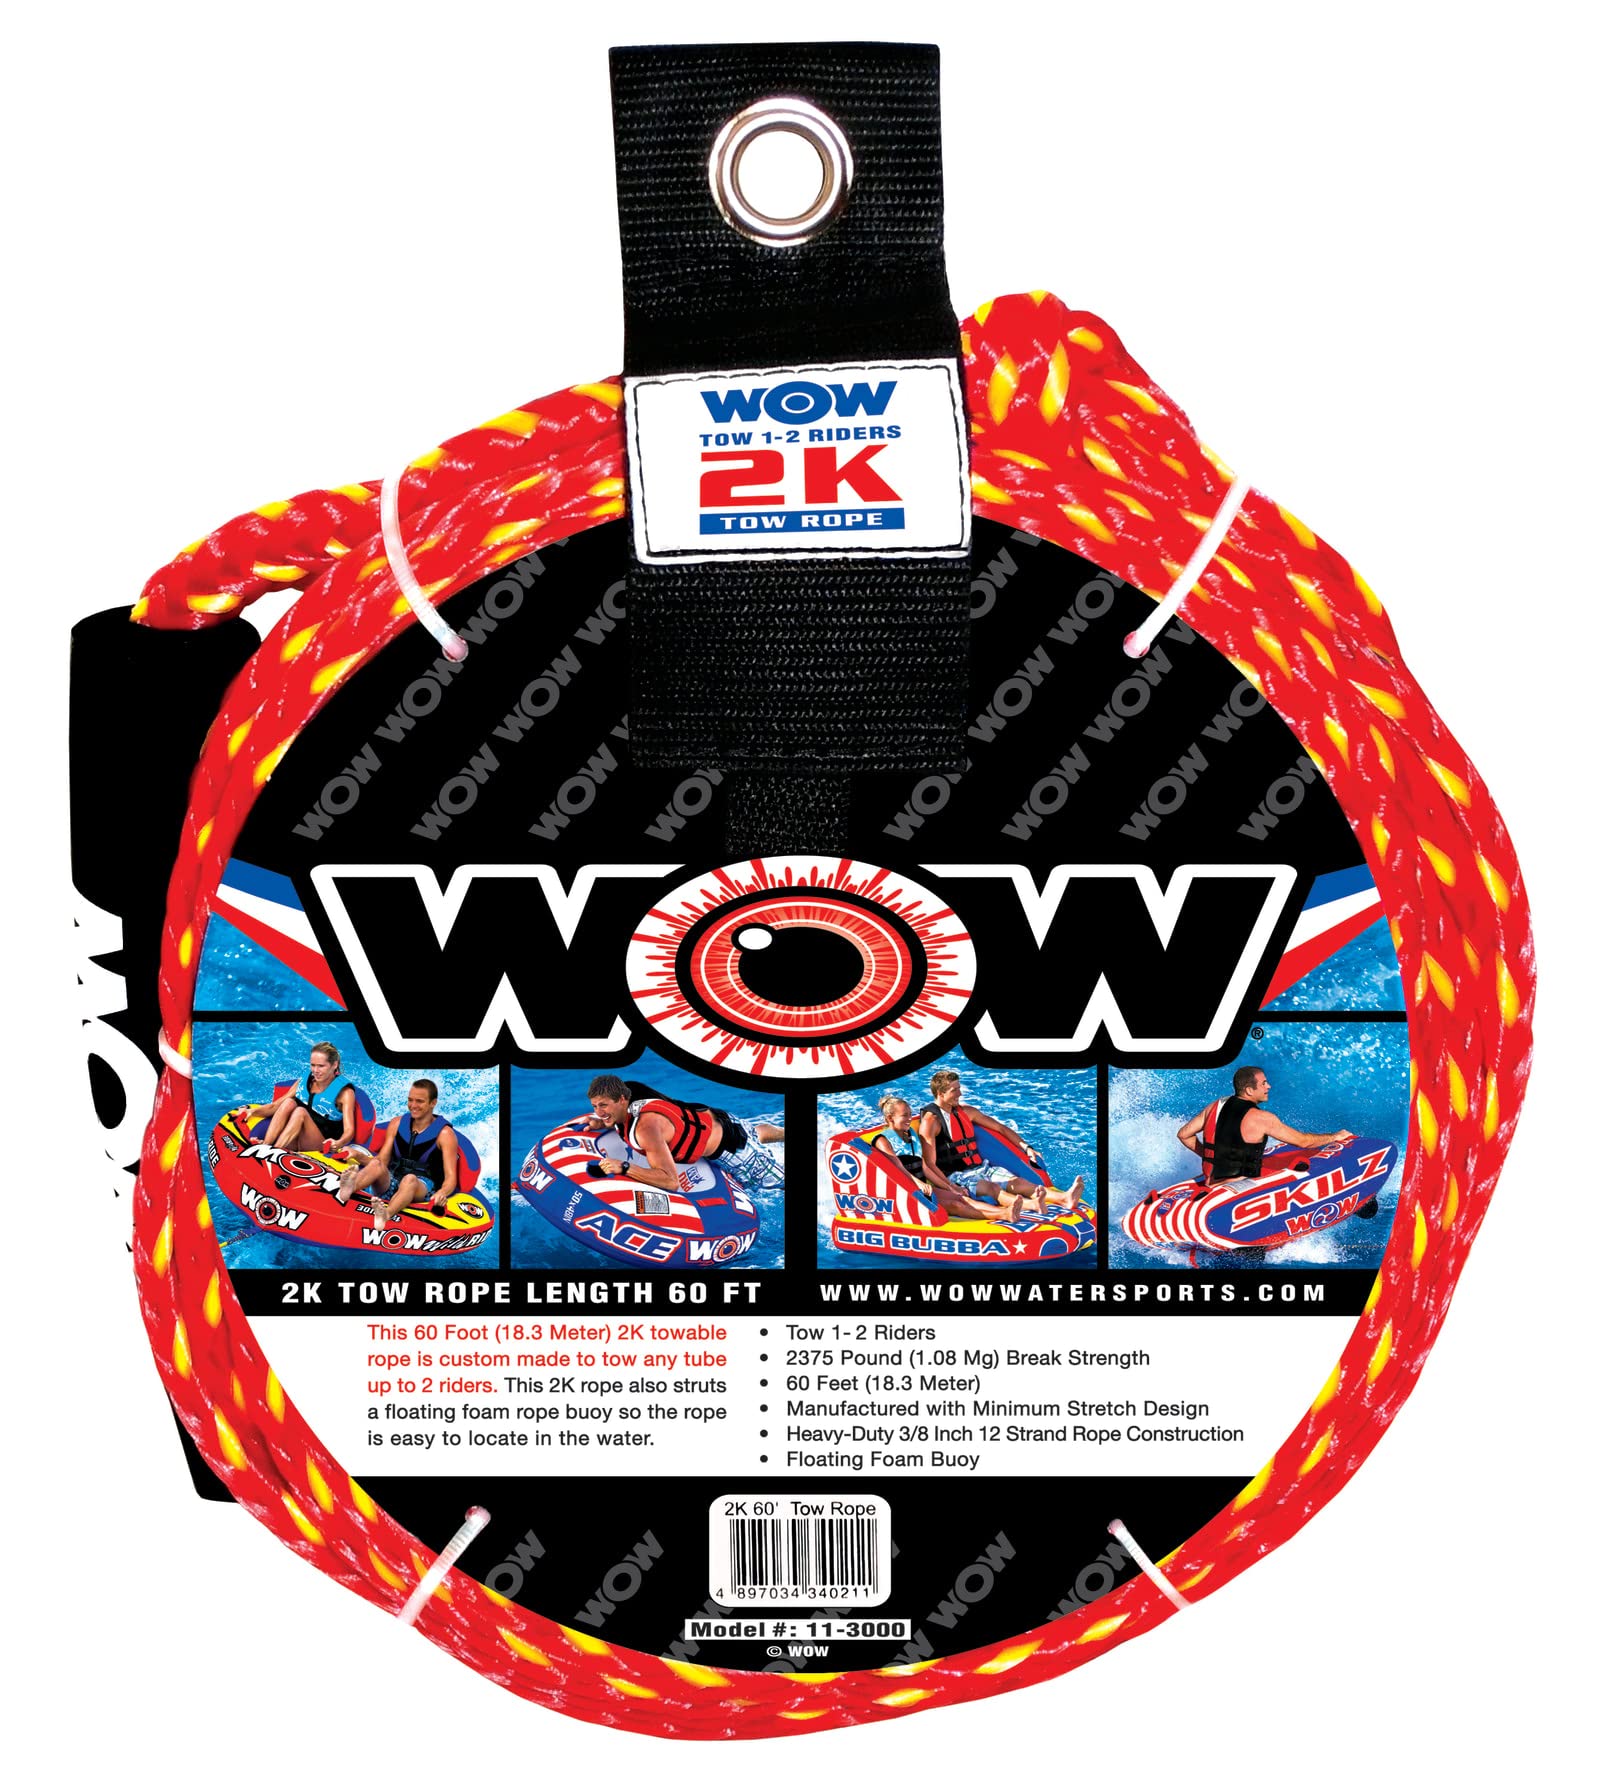 WOW Sports Tow Rope